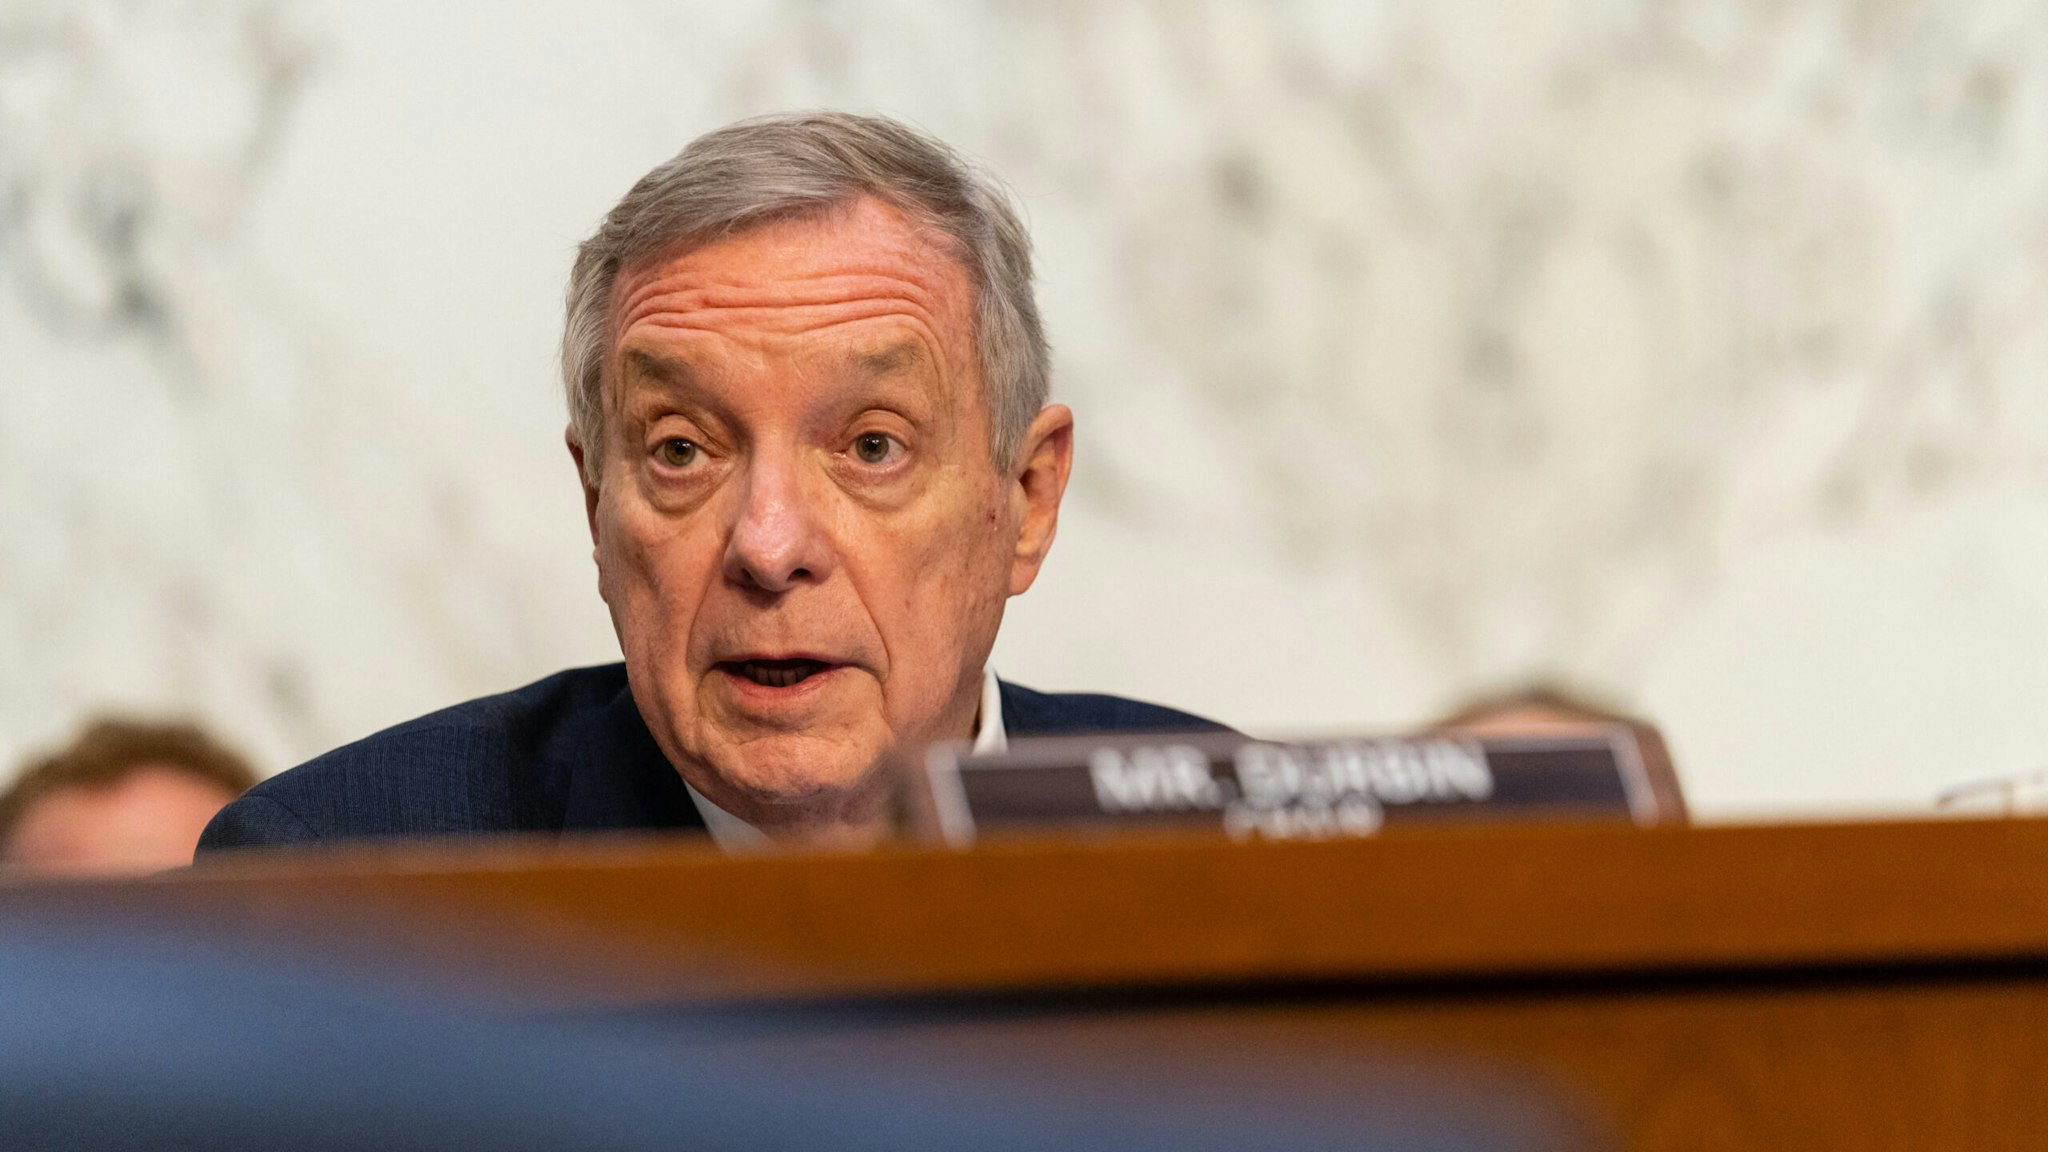 Senator Dick Durbin, a Democrat from Illinois and chairman of the Senate Judiciary Committee, speaks during a markup hearing for Ketanji Brown Jackson, associate justice of the U.S. Supreme Court nominee for U.S. President Joe Biden, in Washington, D.C., U.S., on Monday, April 4, 2022.